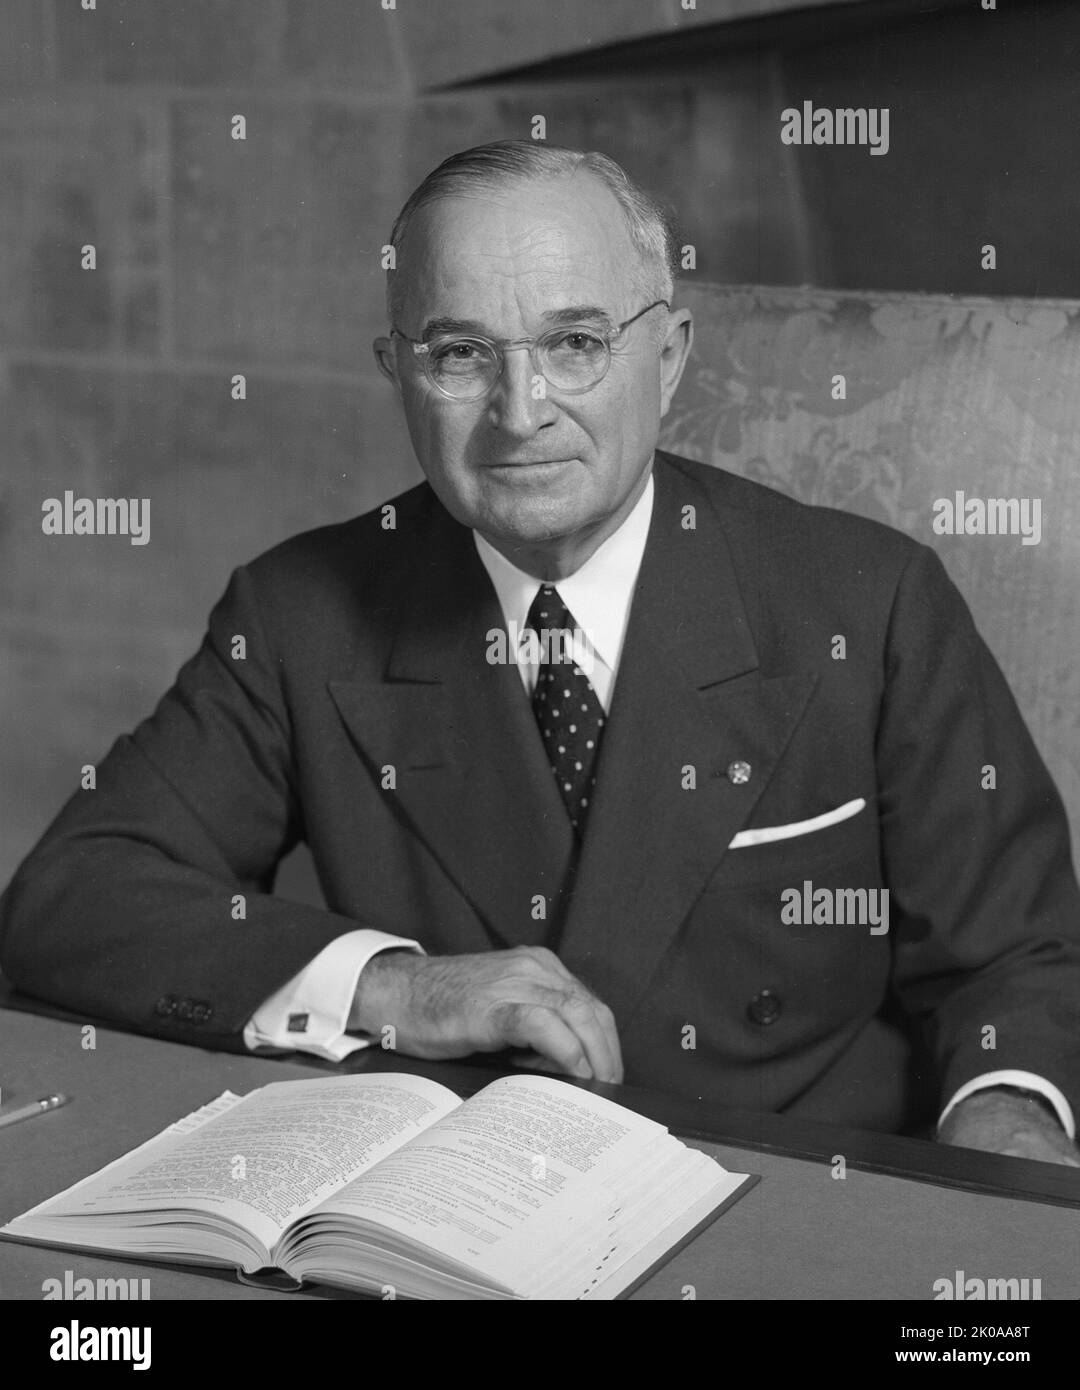 Harry S. Truman (May 8, 1884 - December 26, 1972) was the 33rd president of the United States, serving from 1945 to 1953. A lifetime member of the Democratic Party, he previously served as the 34th vice president under Franklin Roosevelt, and as a United States Senator from Missouri Stock Photo